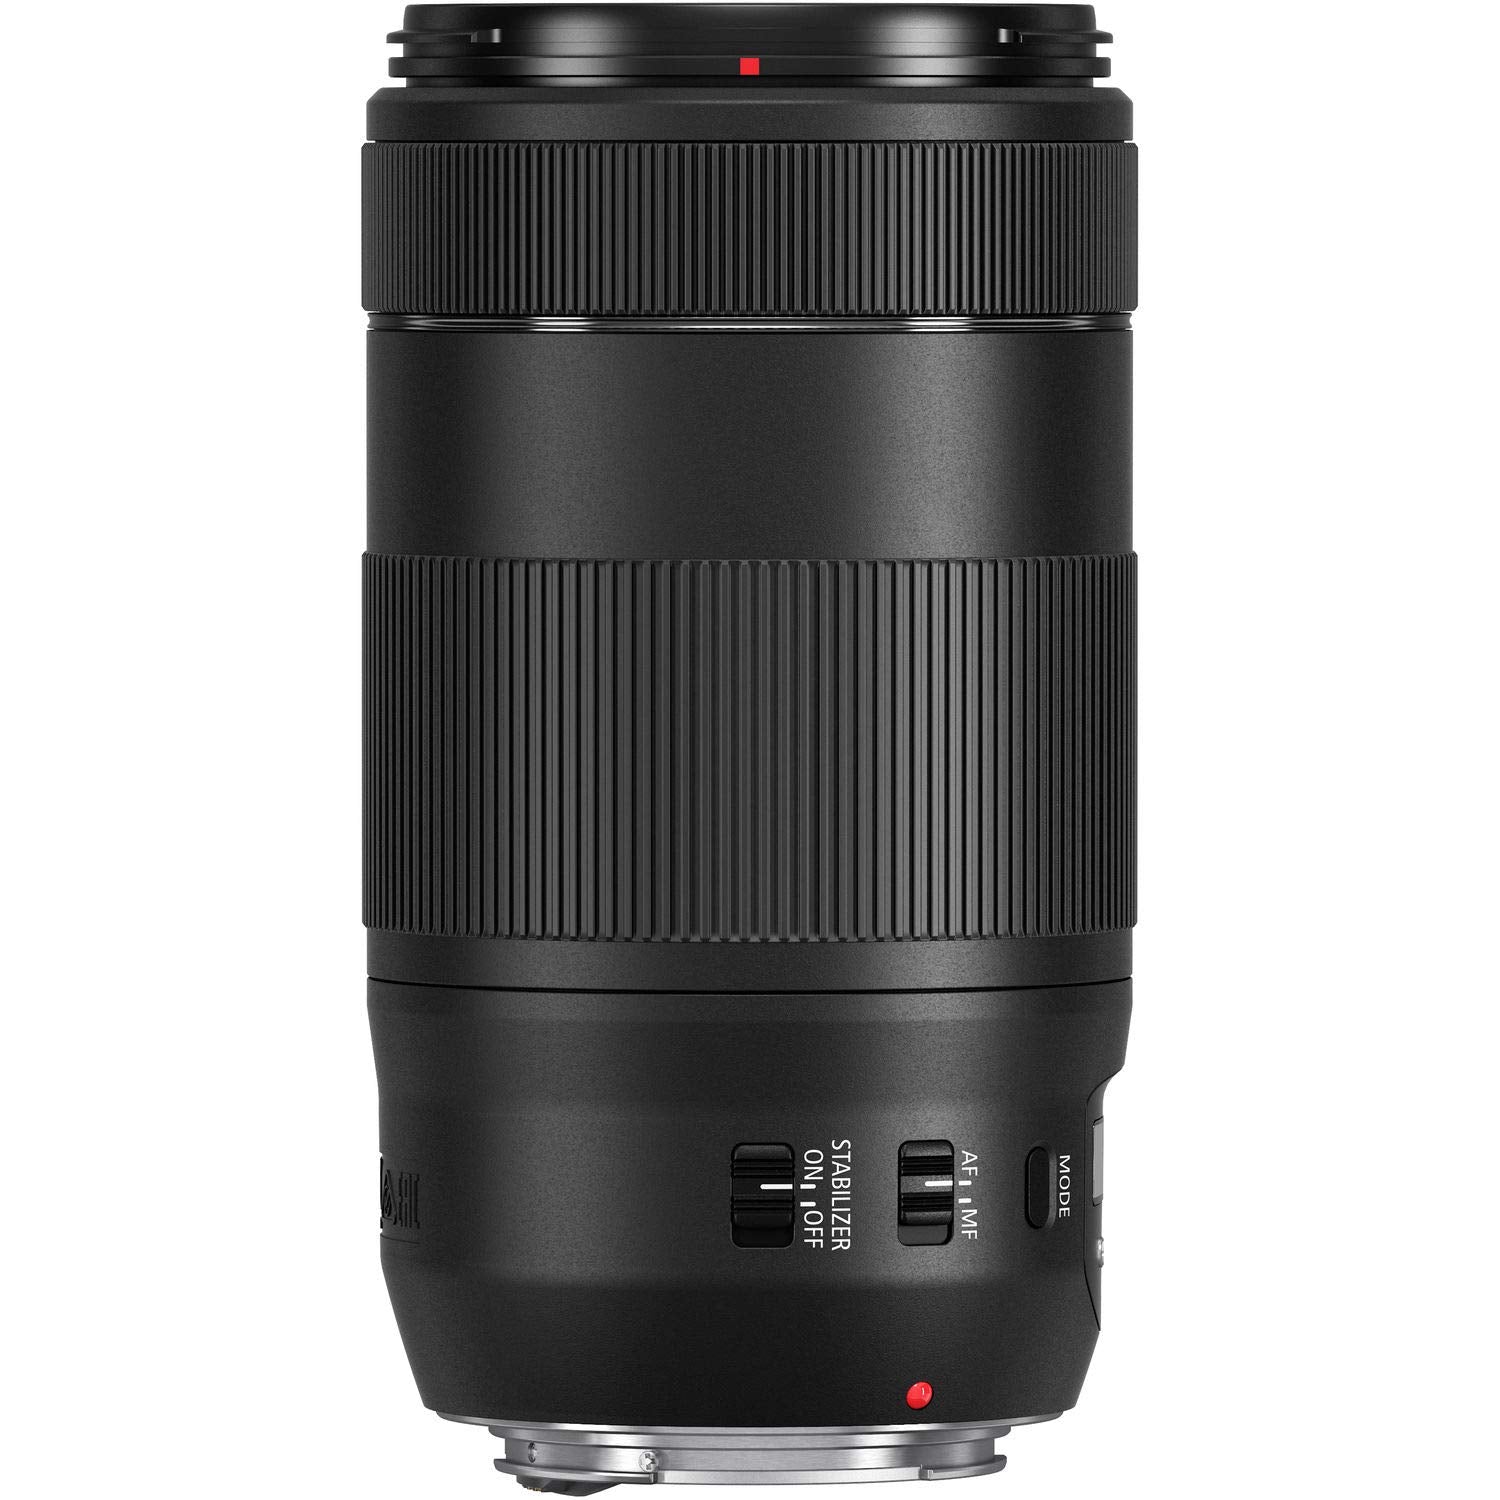 Canon EF 70-300mm F/4-5.6 is Ii USM Lens for Canon 6D, 5D Mark IV, 5D Mark III, 5D Mark II, 6D Mark II, 5Dsr, 5Ds, 1Dx,